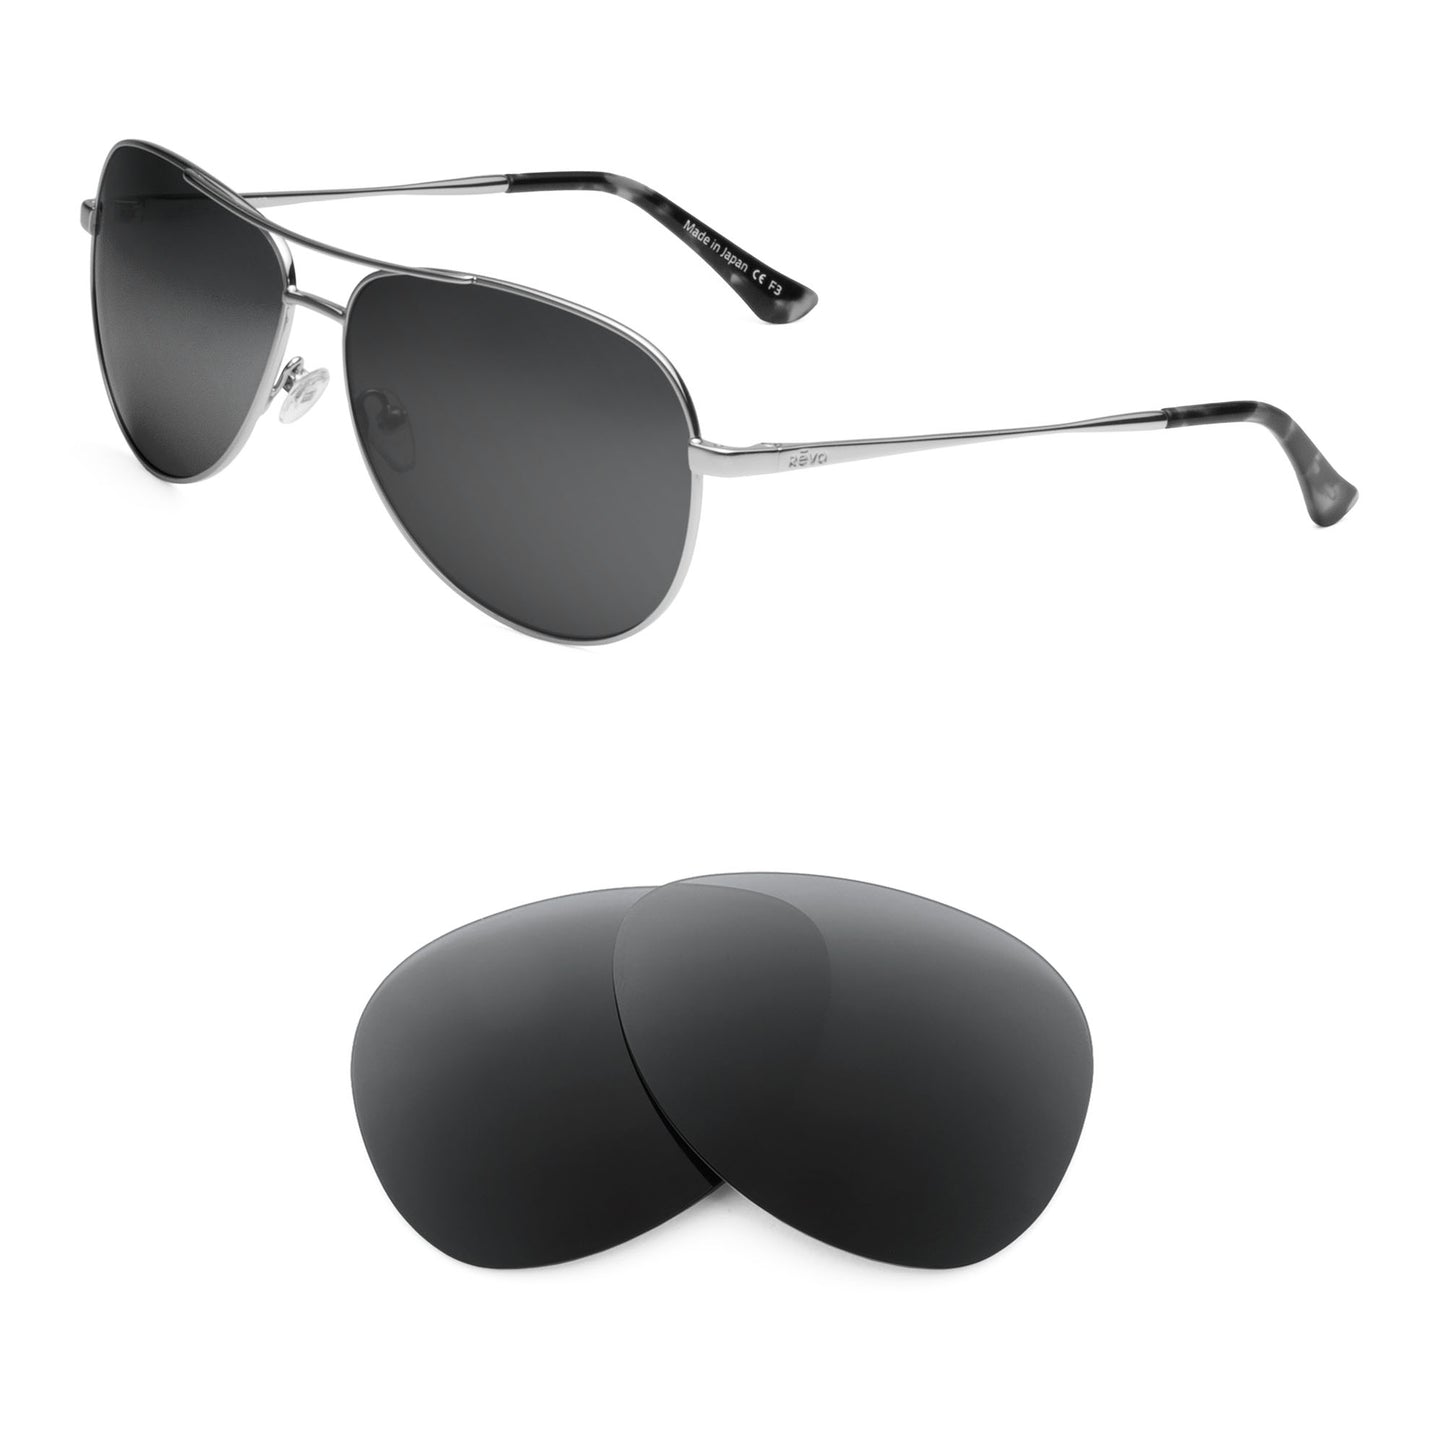 Revo Relay sunglasses with replacement lenses